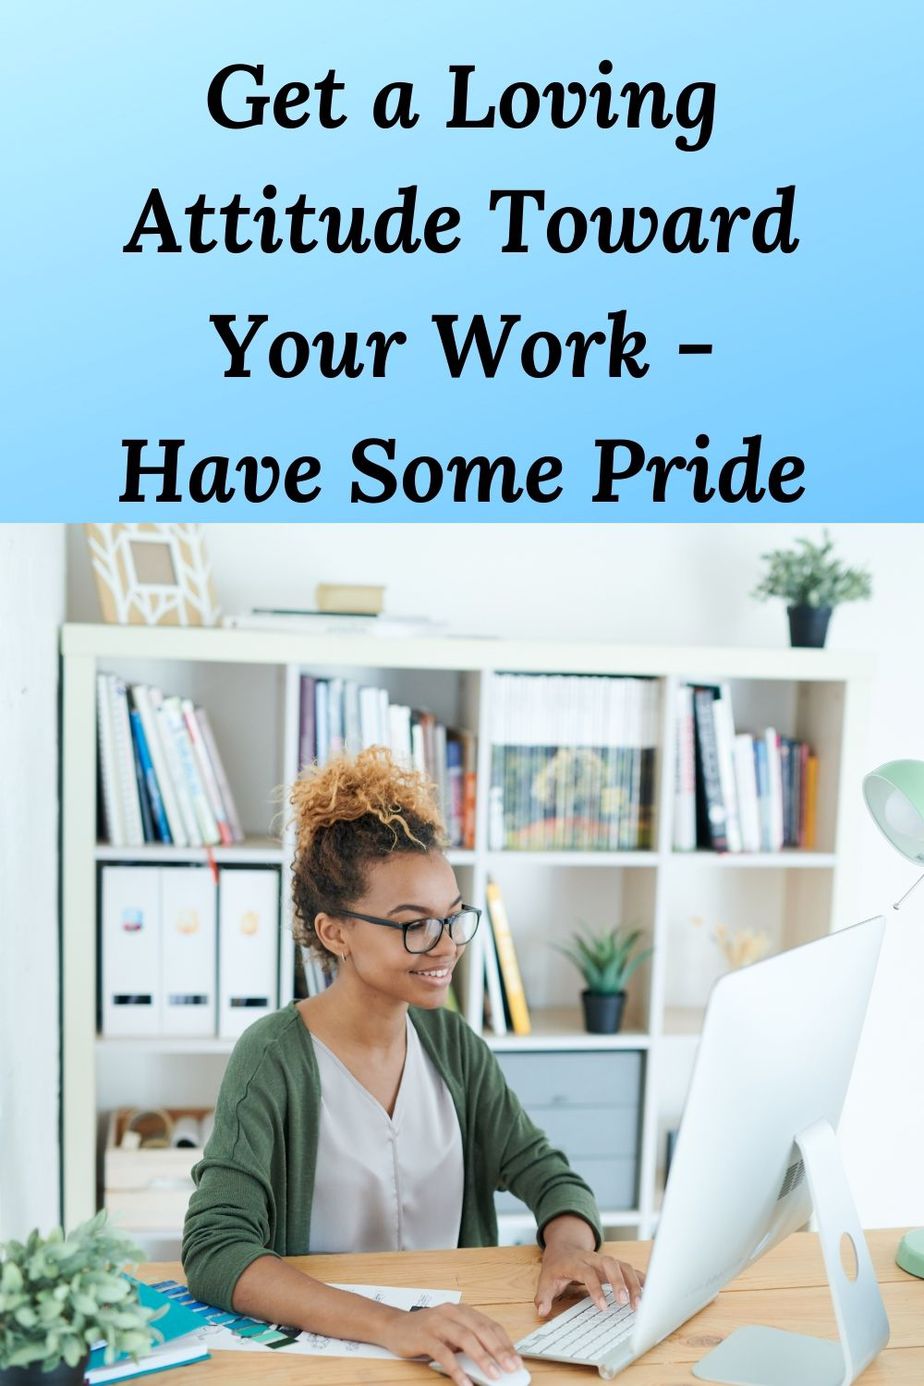 African American woman working at computer and the words "Get a Loving Attitude Toward Your Work - Have Some Pride"